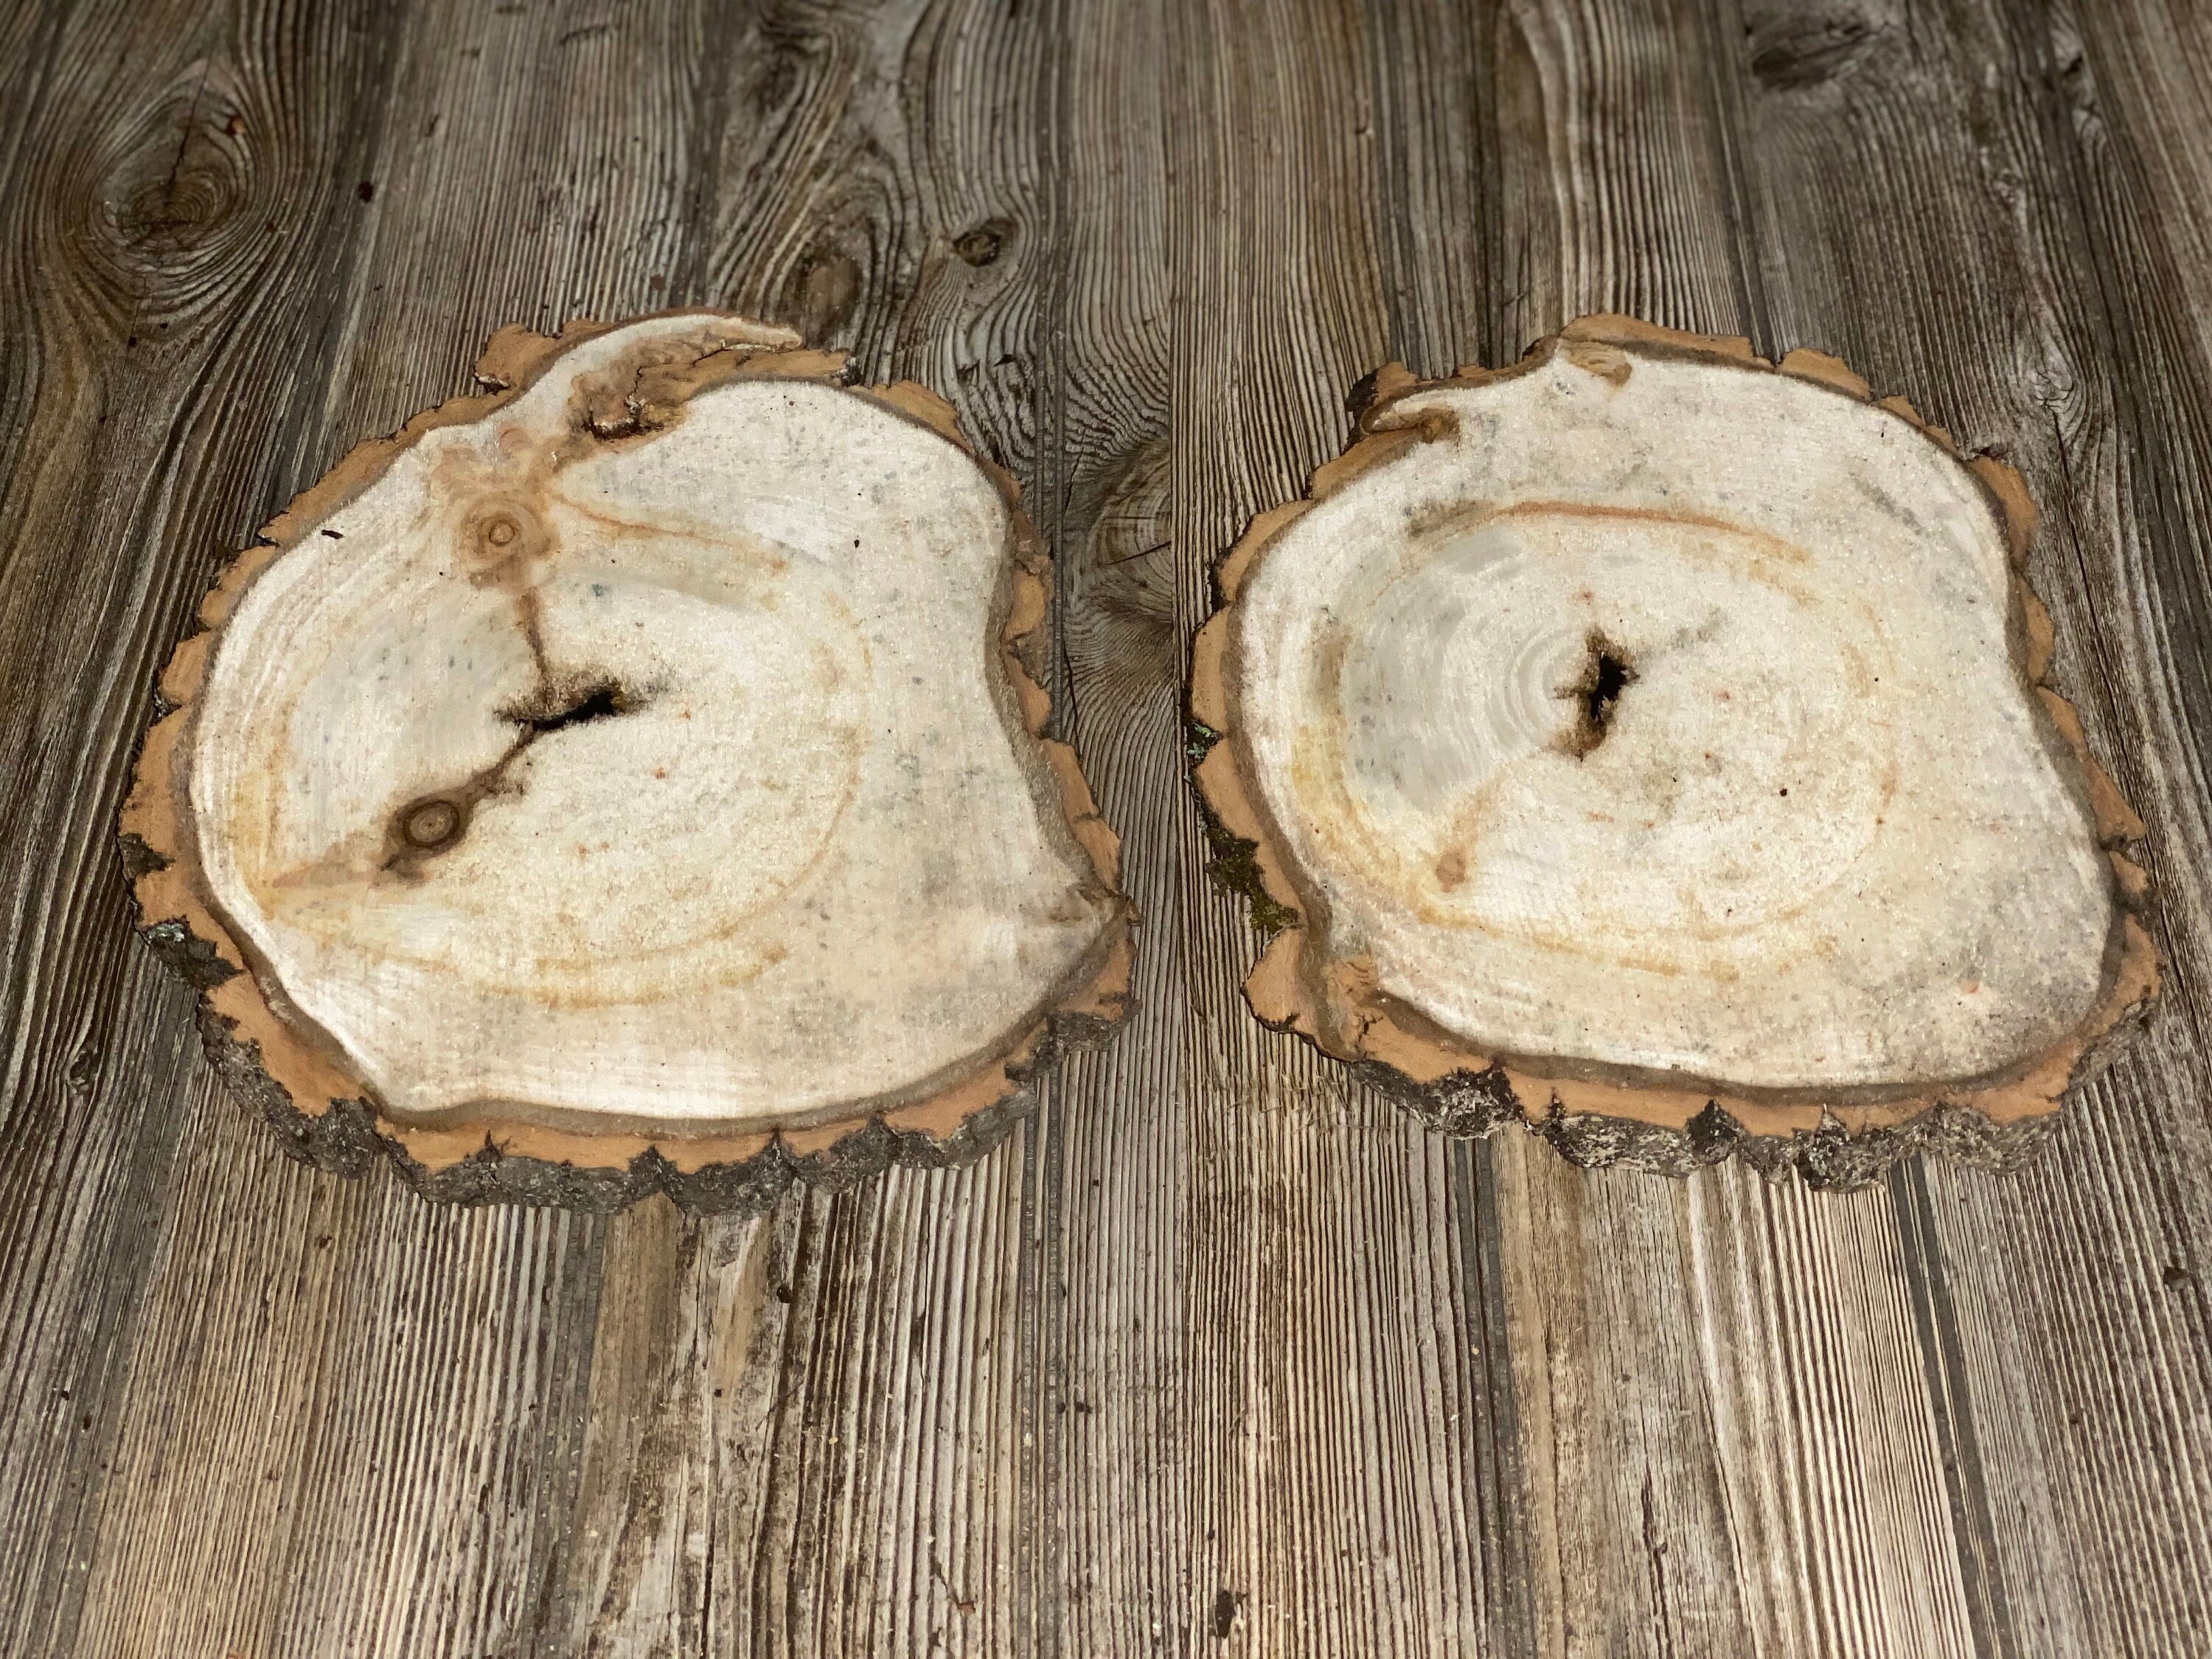 Two Aspen Burl Slices, Approximately 10.5-11 Inches Long by 9 Inches Wide and 3/4 Inches Thick